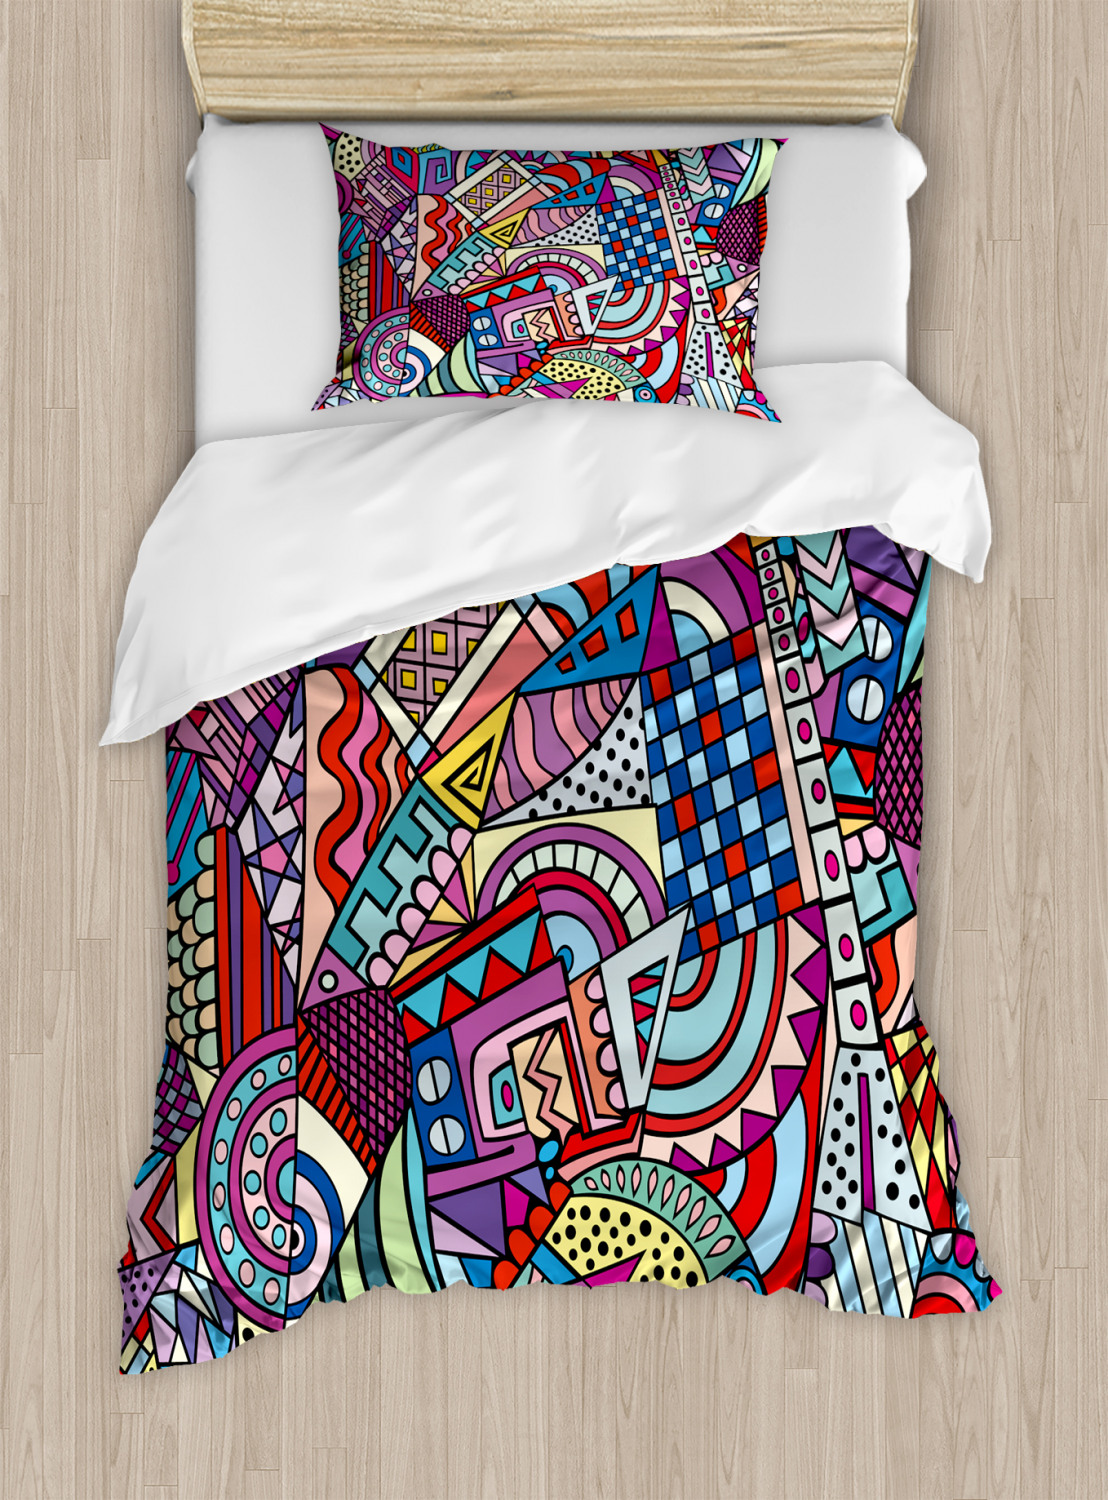 Funky Modern Artistic Print Abstract Quilted Bedspread & Pillow Shams Set 